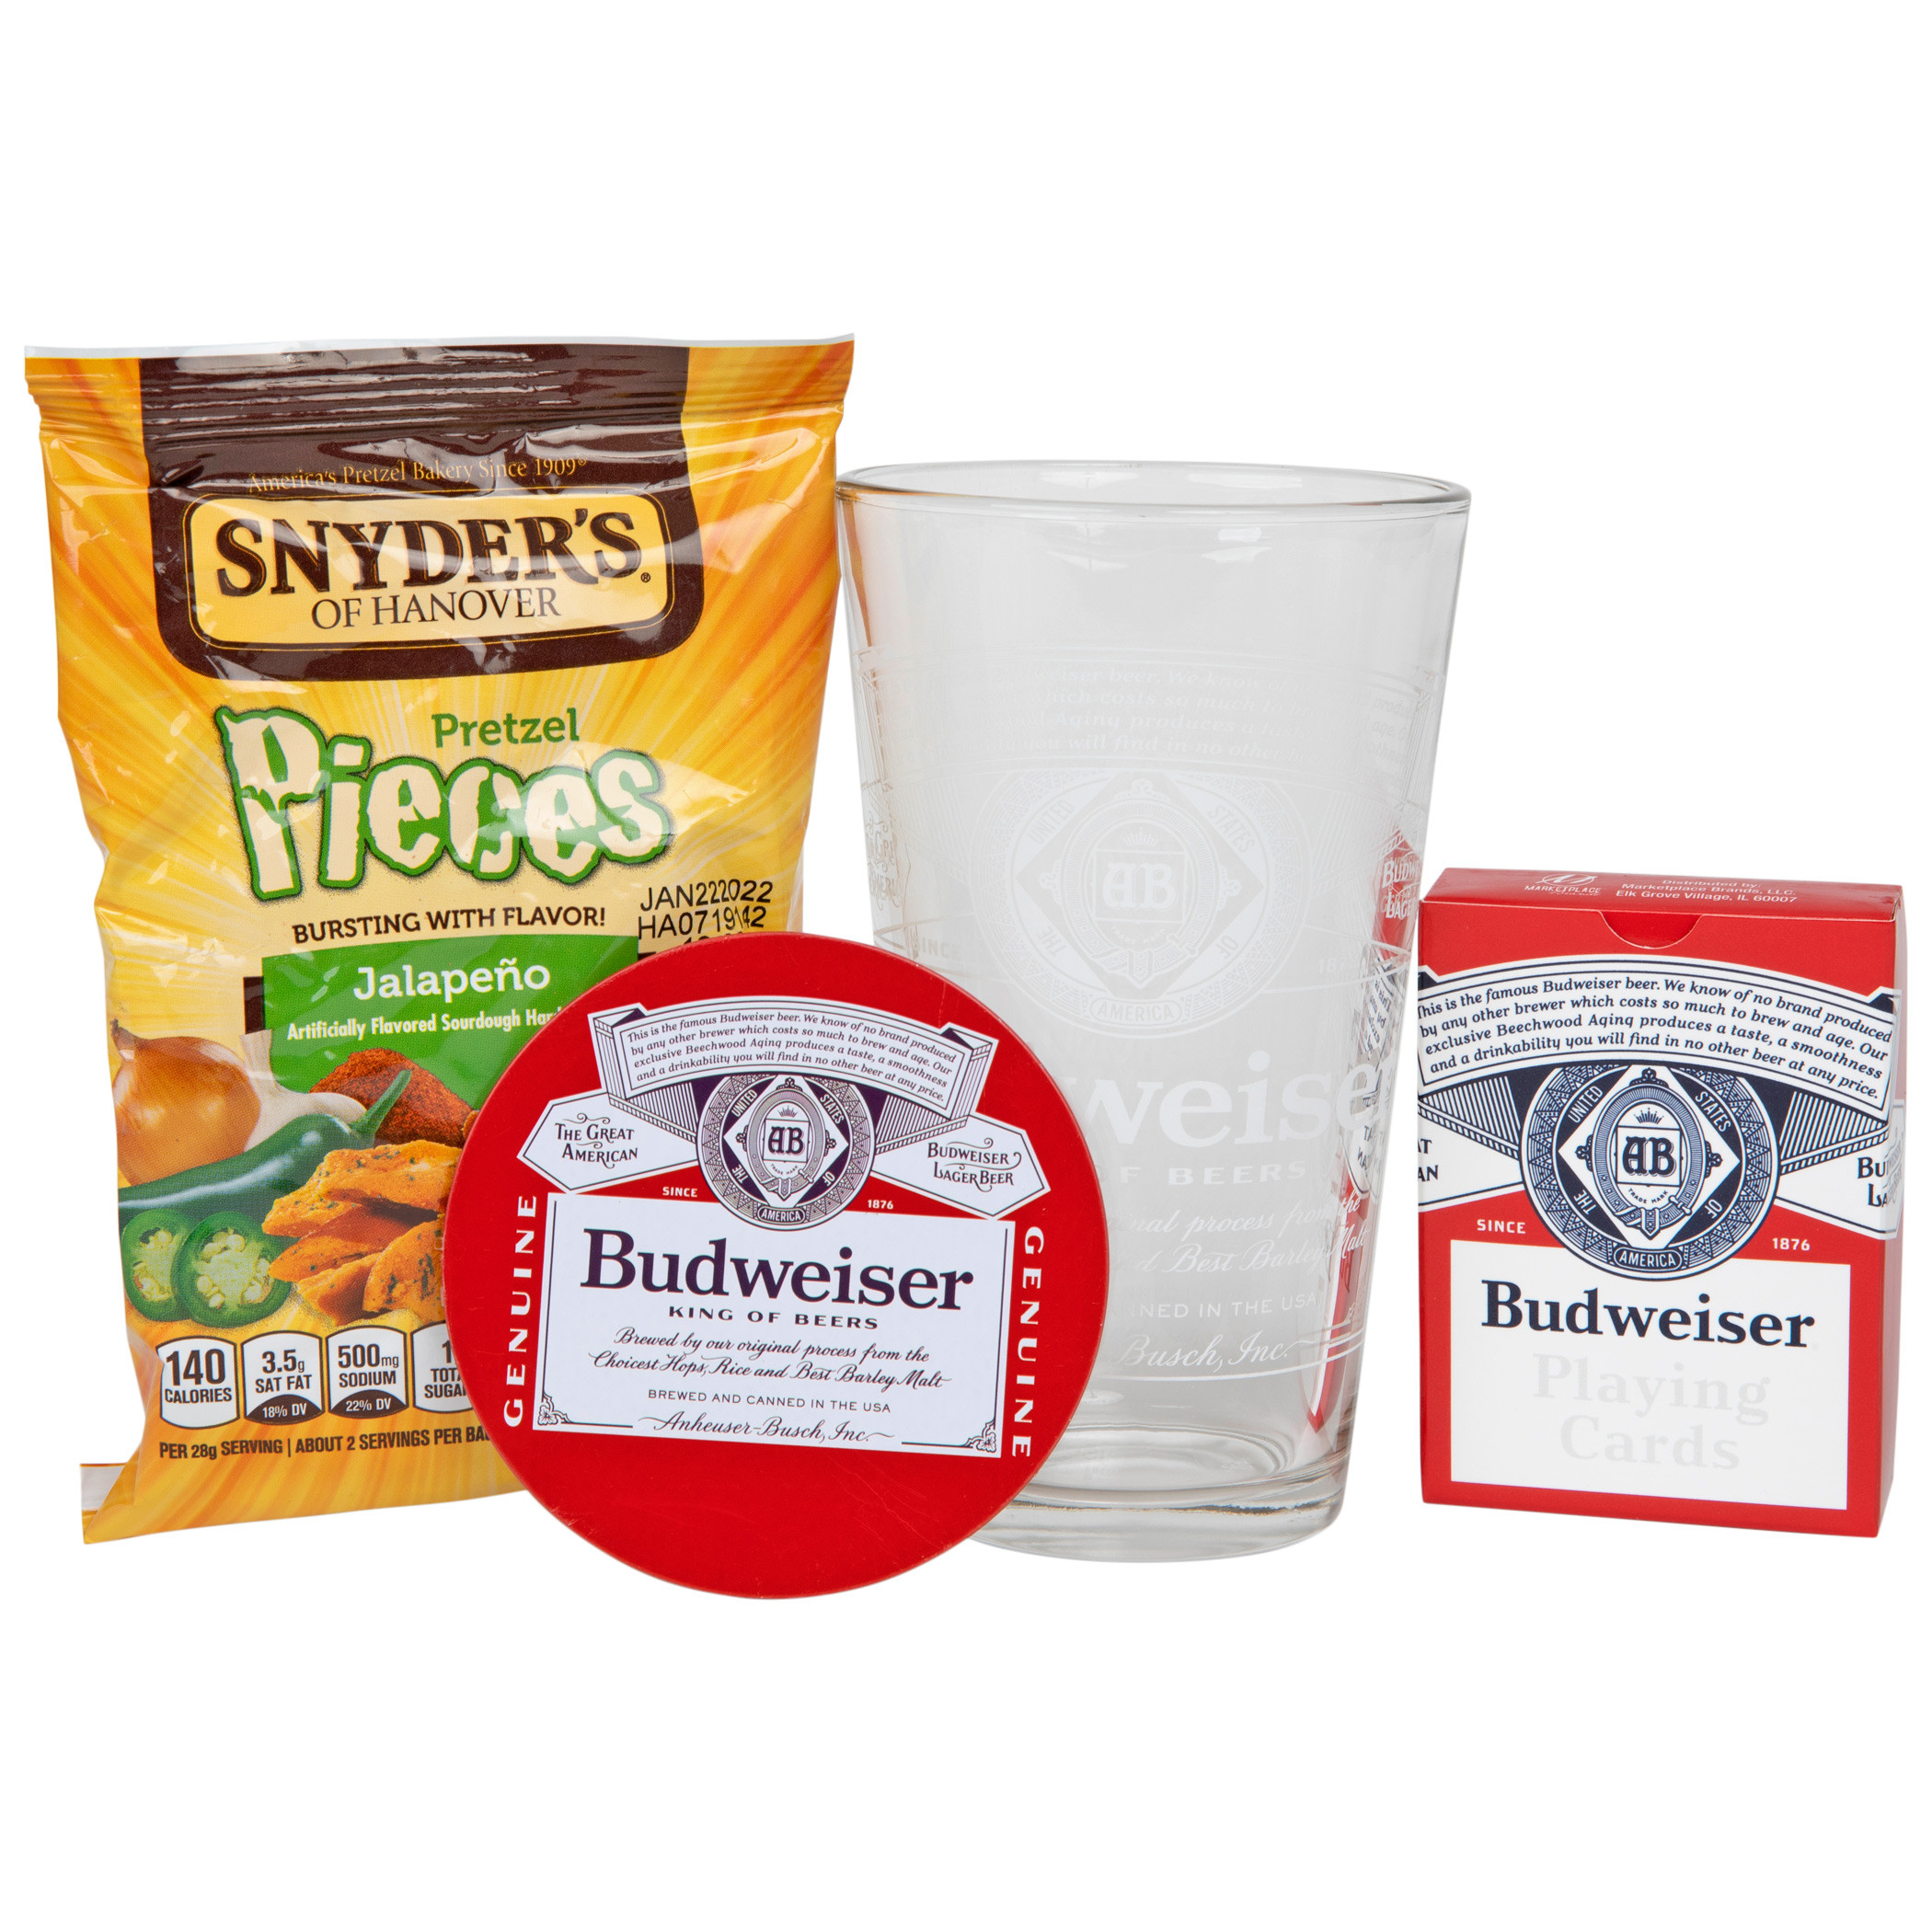 Budweiser Pint Glass Playing Cards and Pretzels Gift Pack